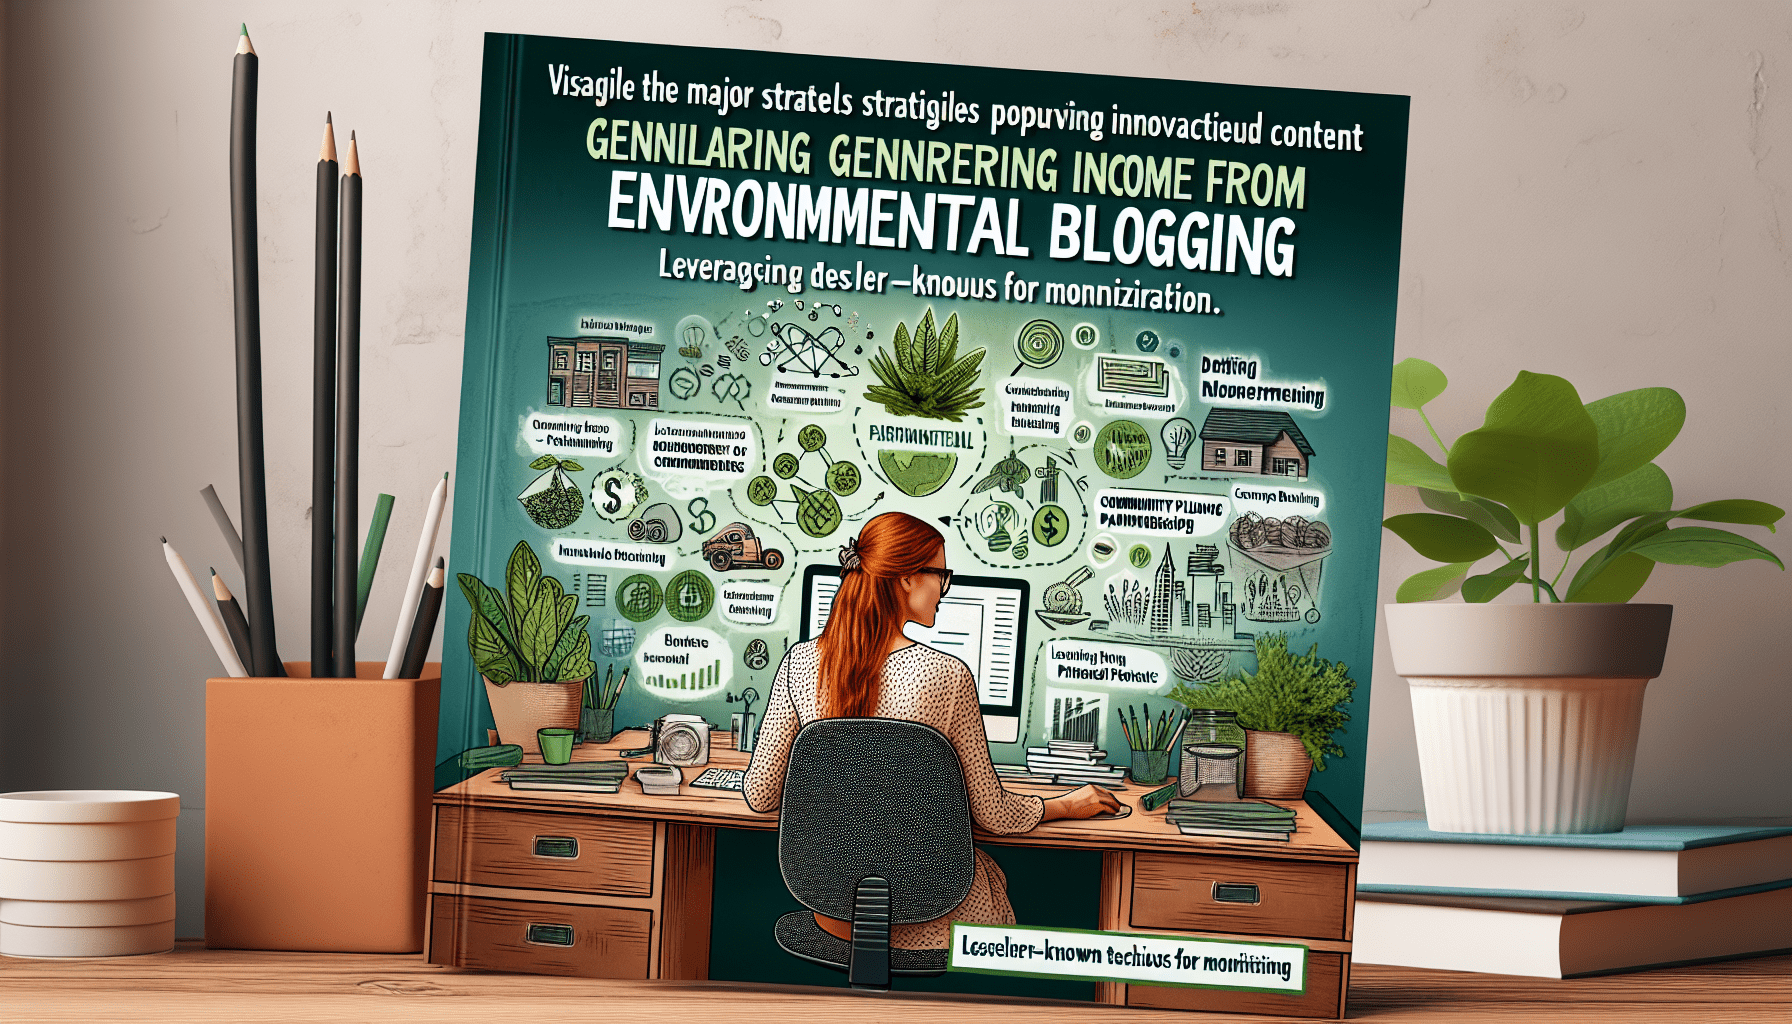 Exploring innovative strategies for generating income from environmental blogging